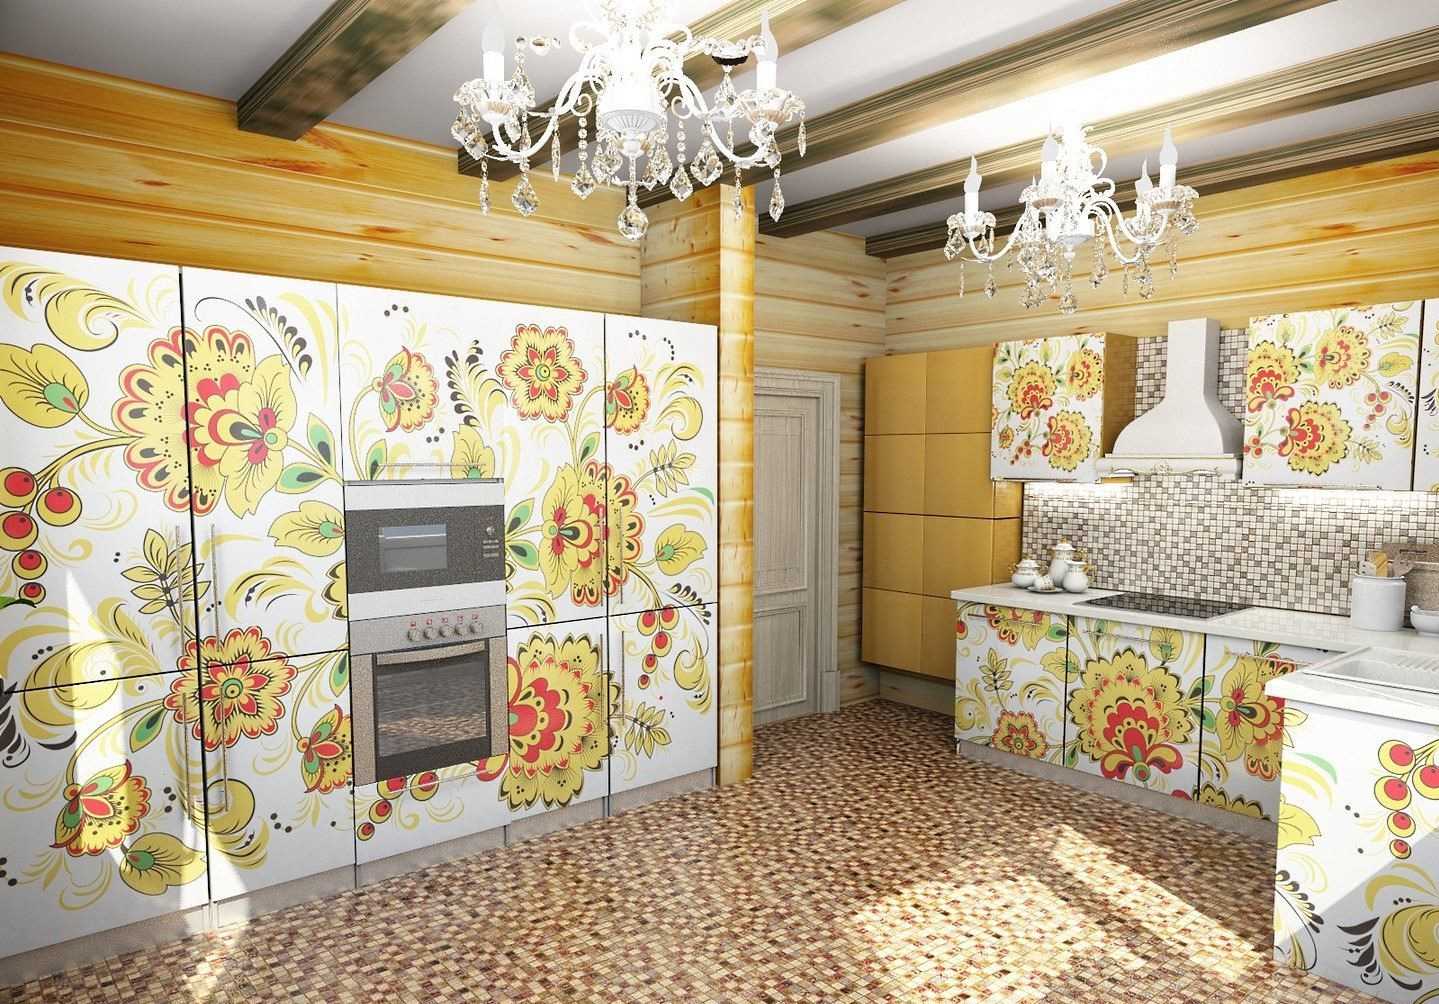 An example of the use of the Russian style in a bright apartment decor